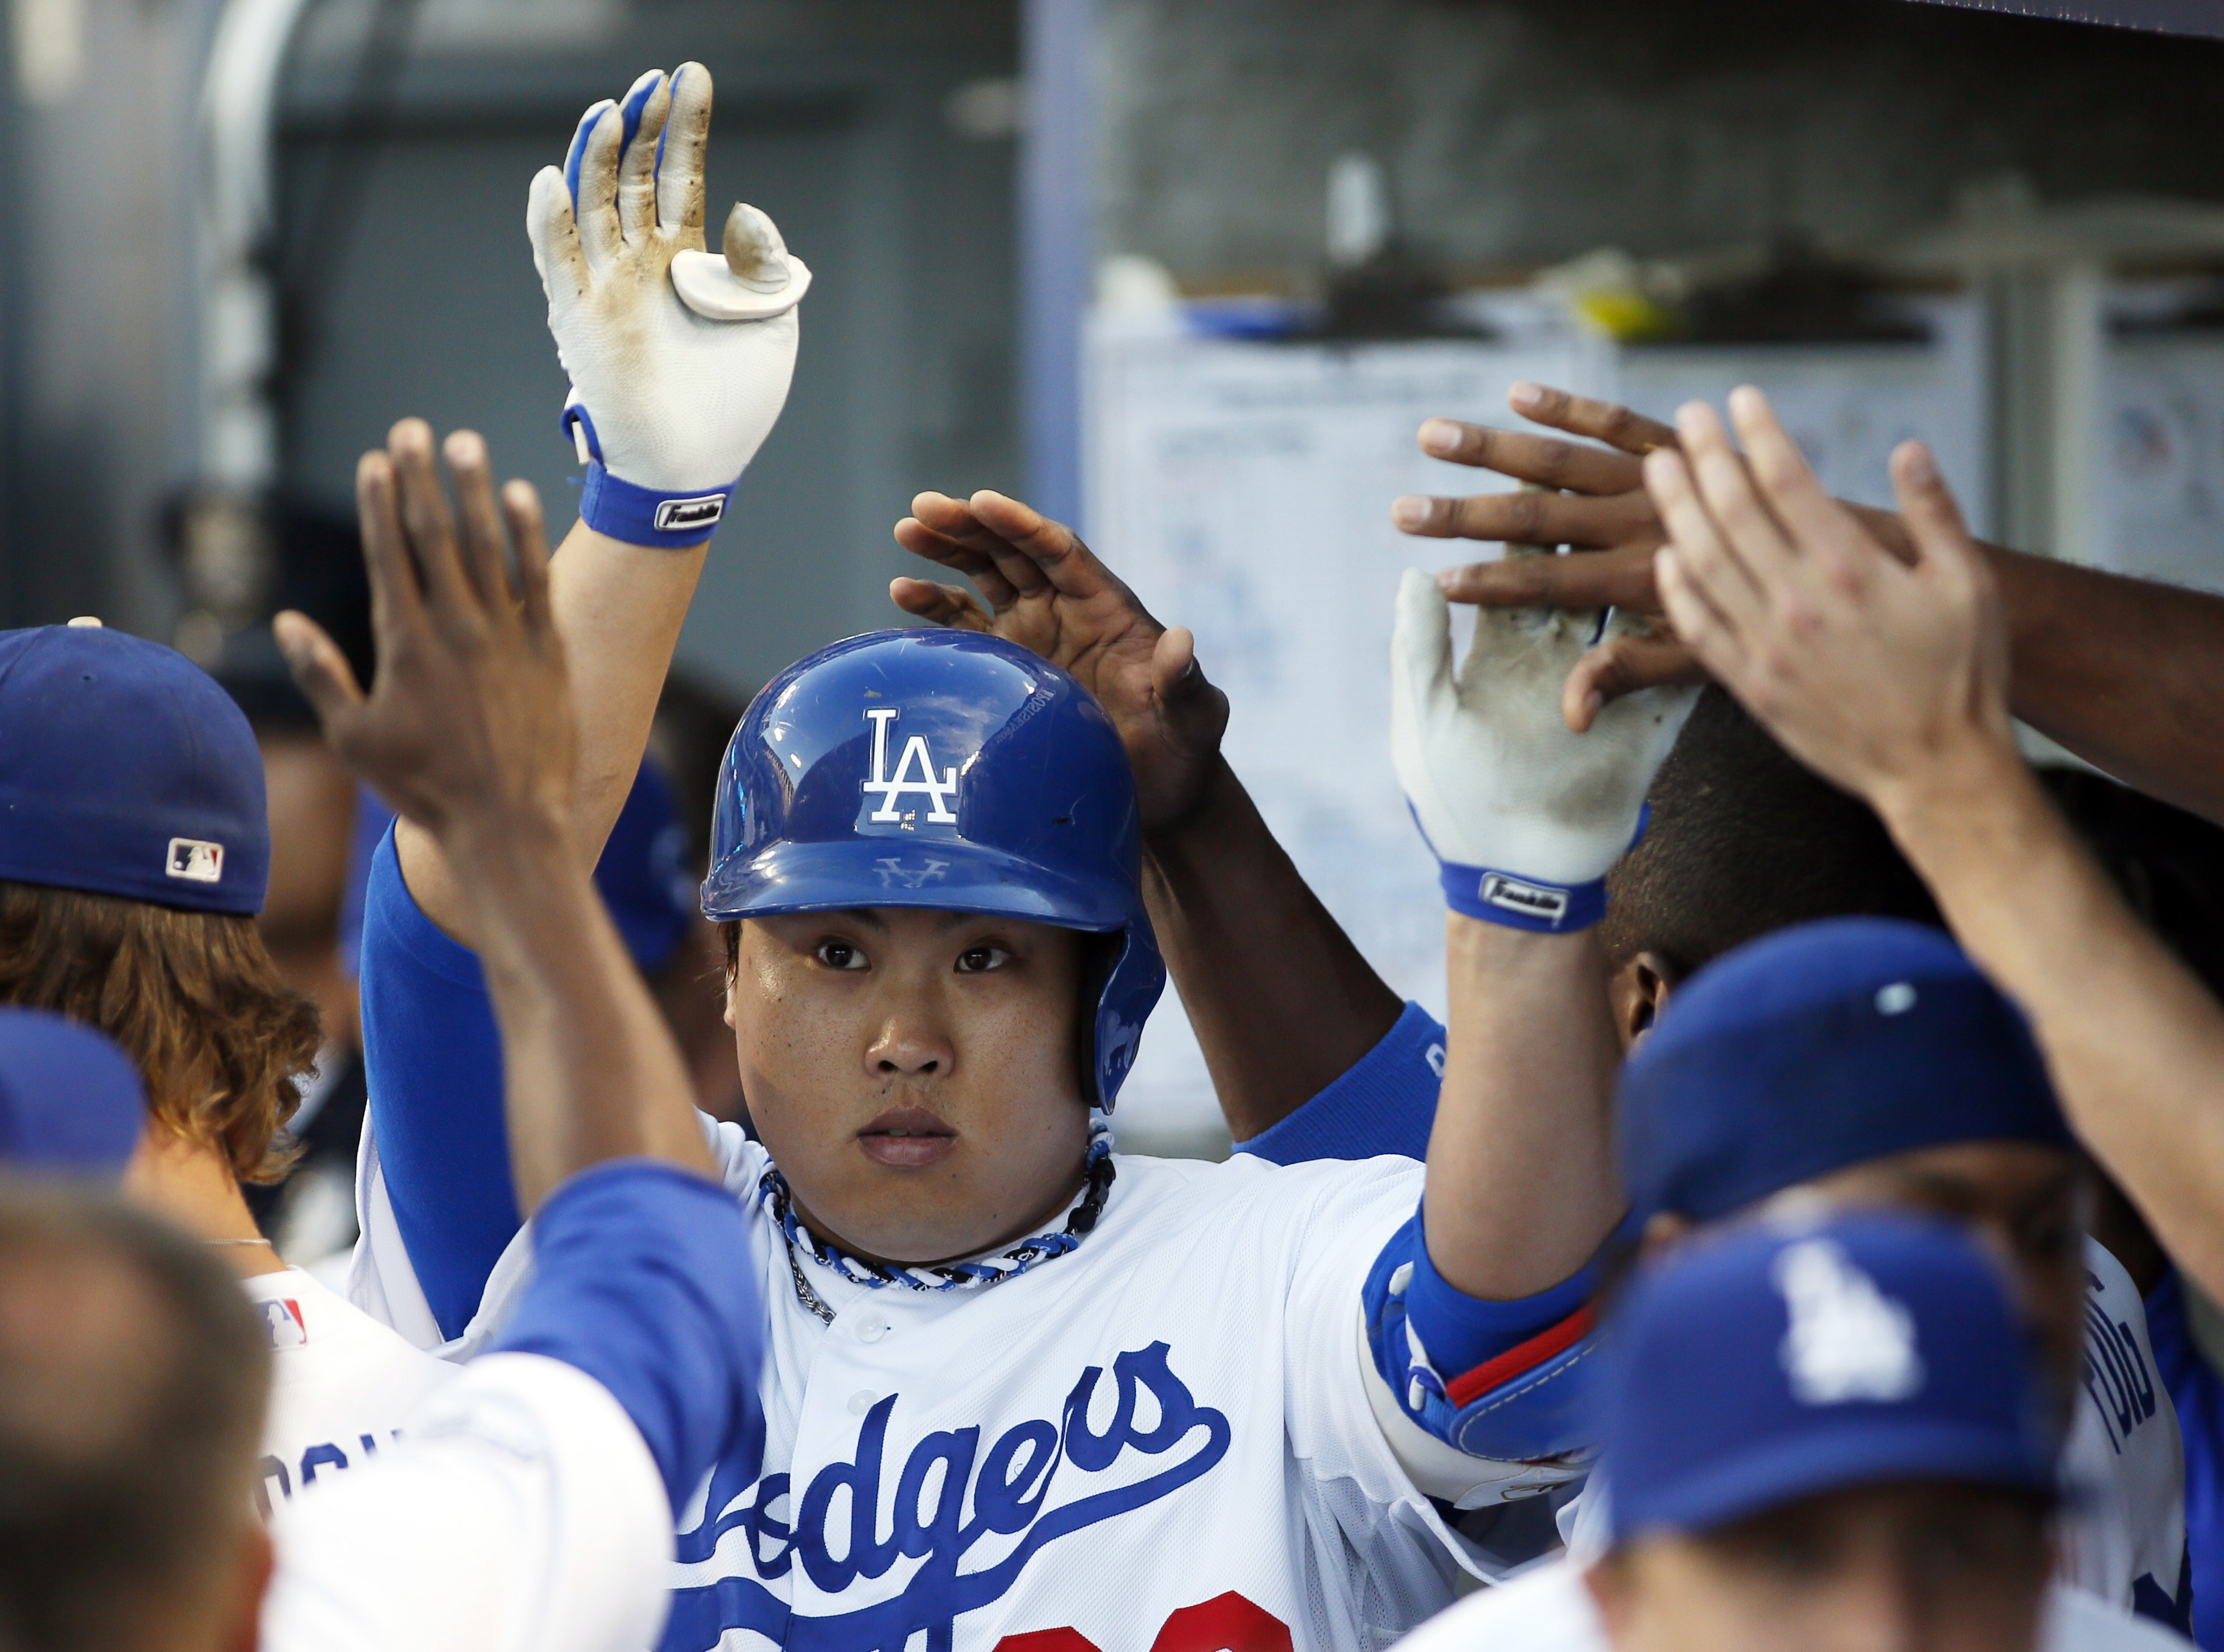 Los Angeles Dodgers starting pitcher Hyun-Jin Ryu high fives teammates in the dugout after he hit a sacrifice fly in the second inning of Game 3 of the National League division baseball series against the Atlanta Braves, Sunday, Oct. 6, 2013, in Los Angeles. (AP Photo/Danny Moloshok)